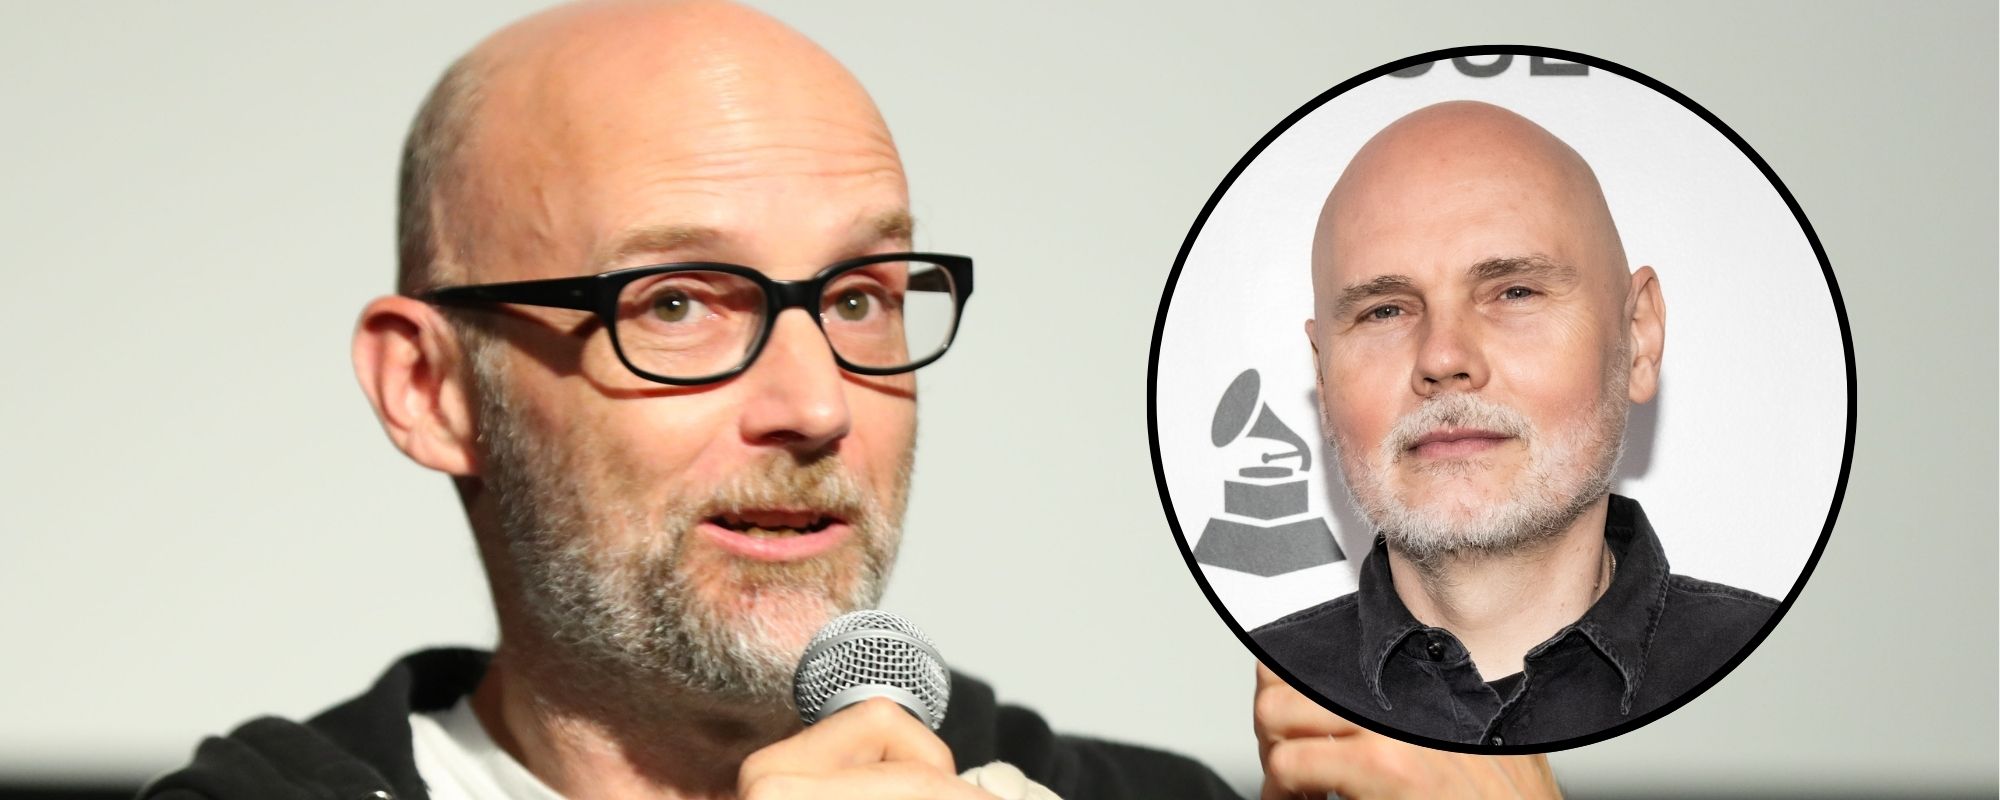 Composite image of Moby and Billy Corgan